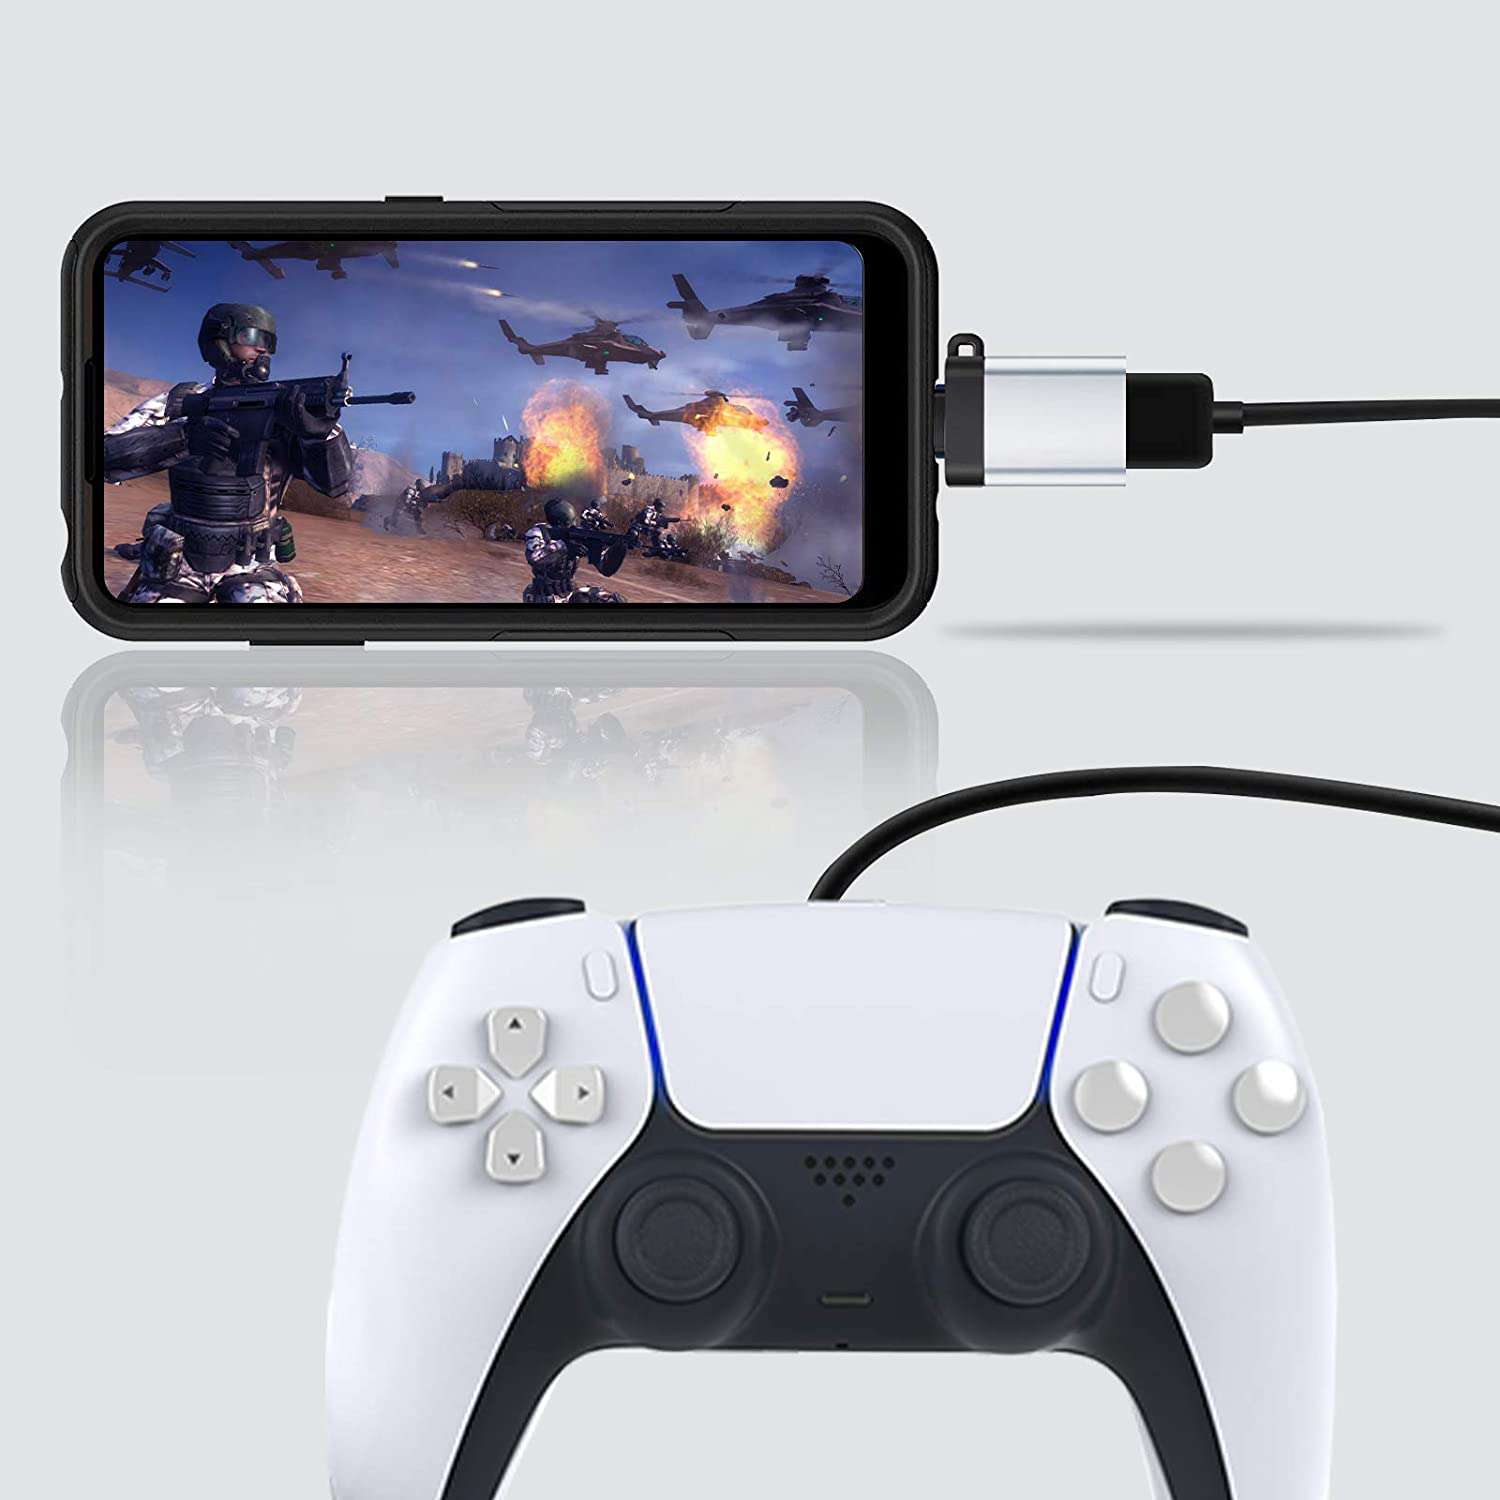 Connect your phone to a game controller and enjoy gaming using this adapter.